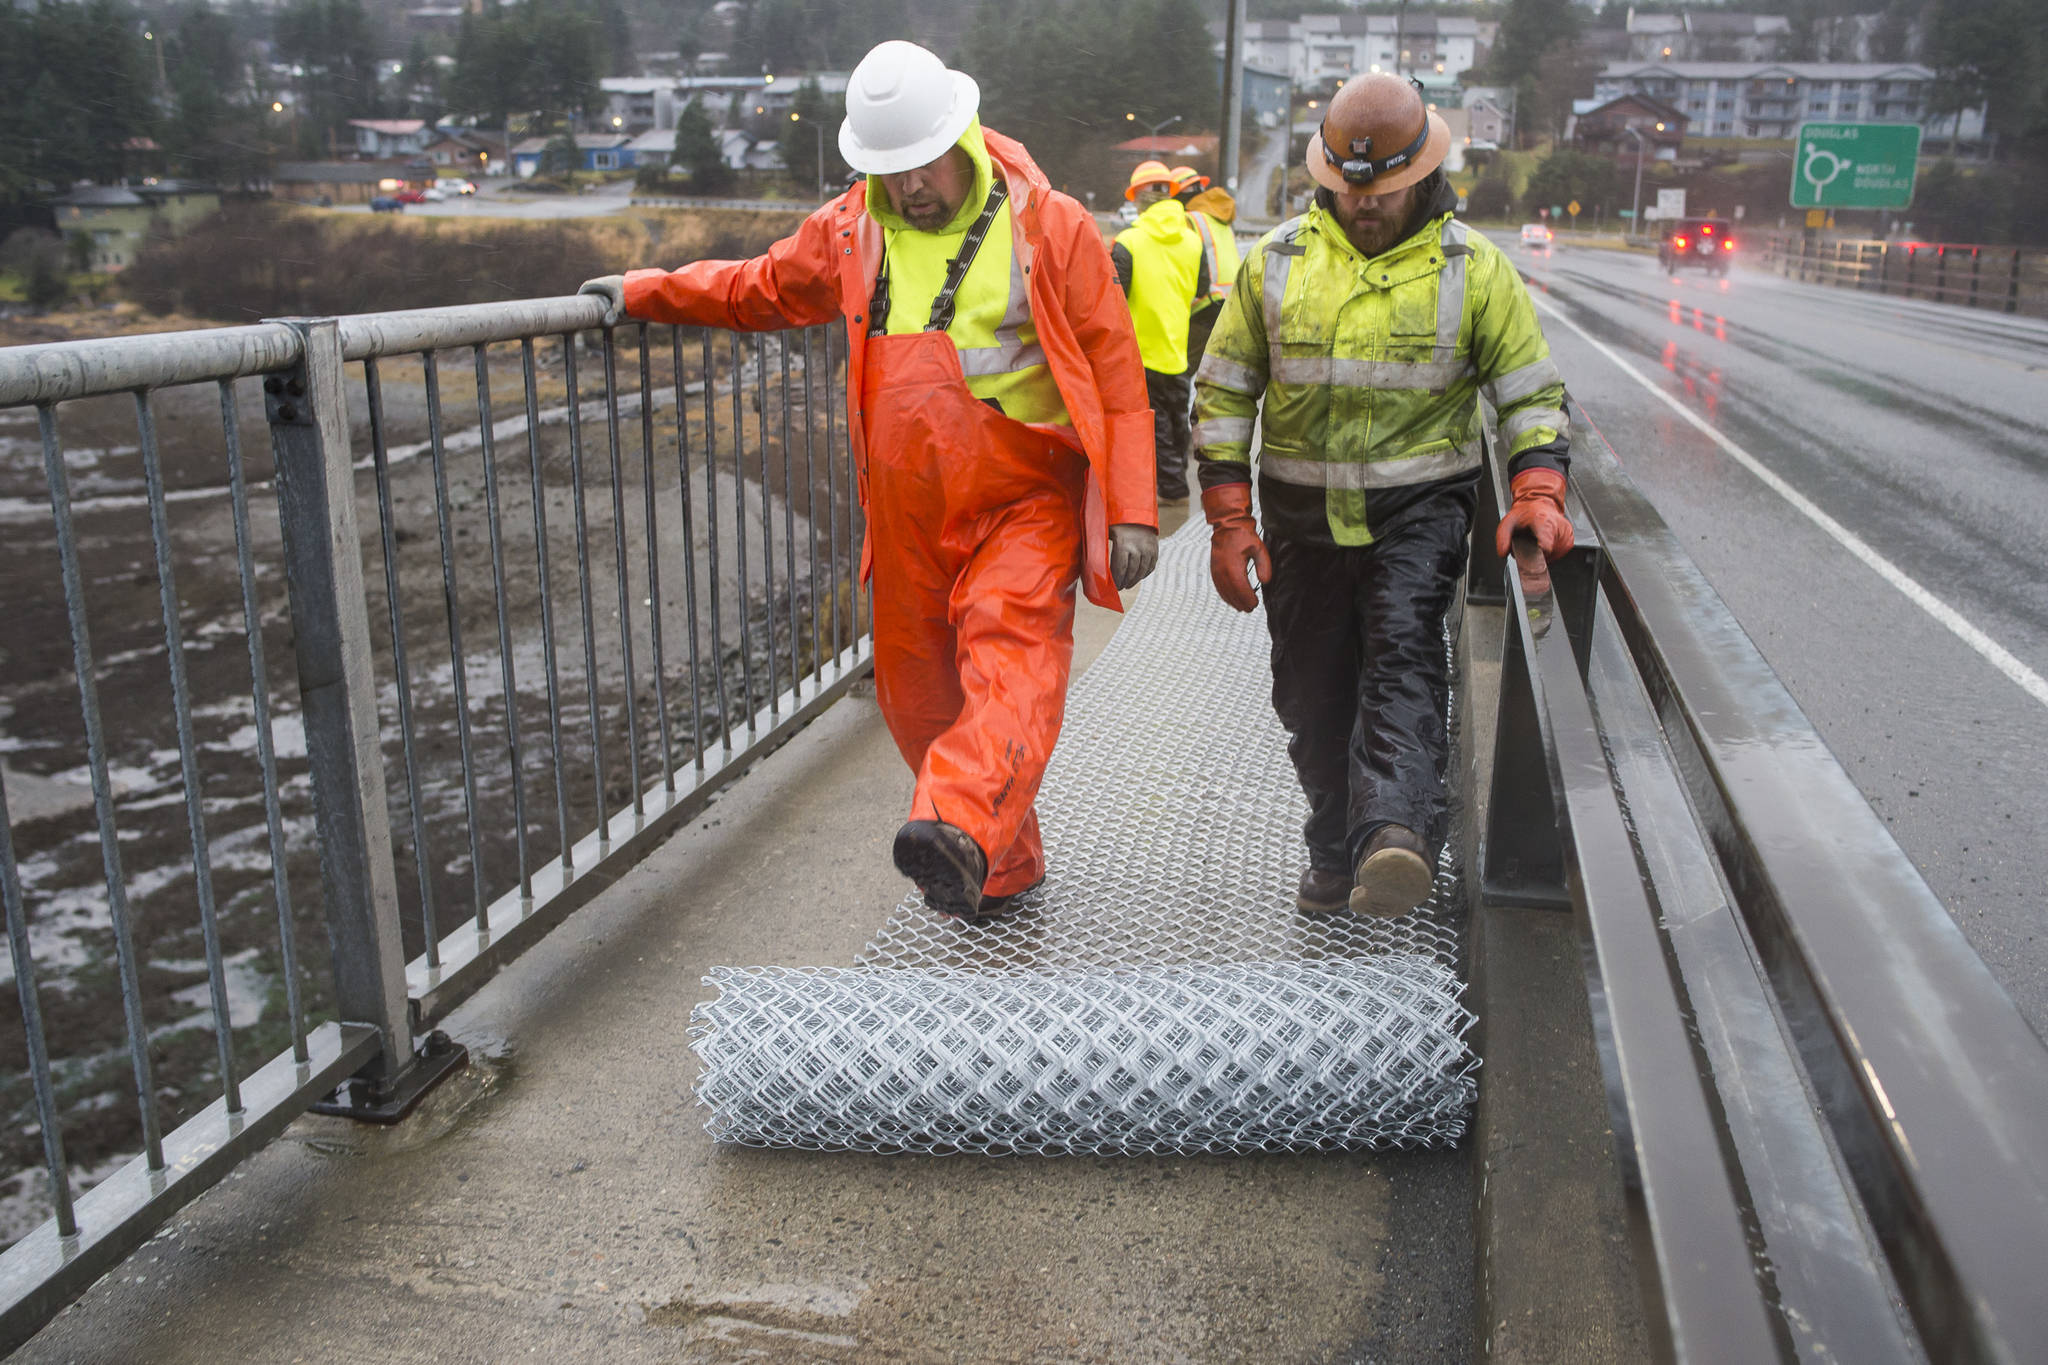 Richard Asplund, left, and Nate Narum, from the Department of Transportation and Public Facilities, roll out chain-link fencing before installation along the pedestrian walkway over the Douglas Bridge on Monday, Nov. 26, 2018. (Michael Penn | Juneau Empire)